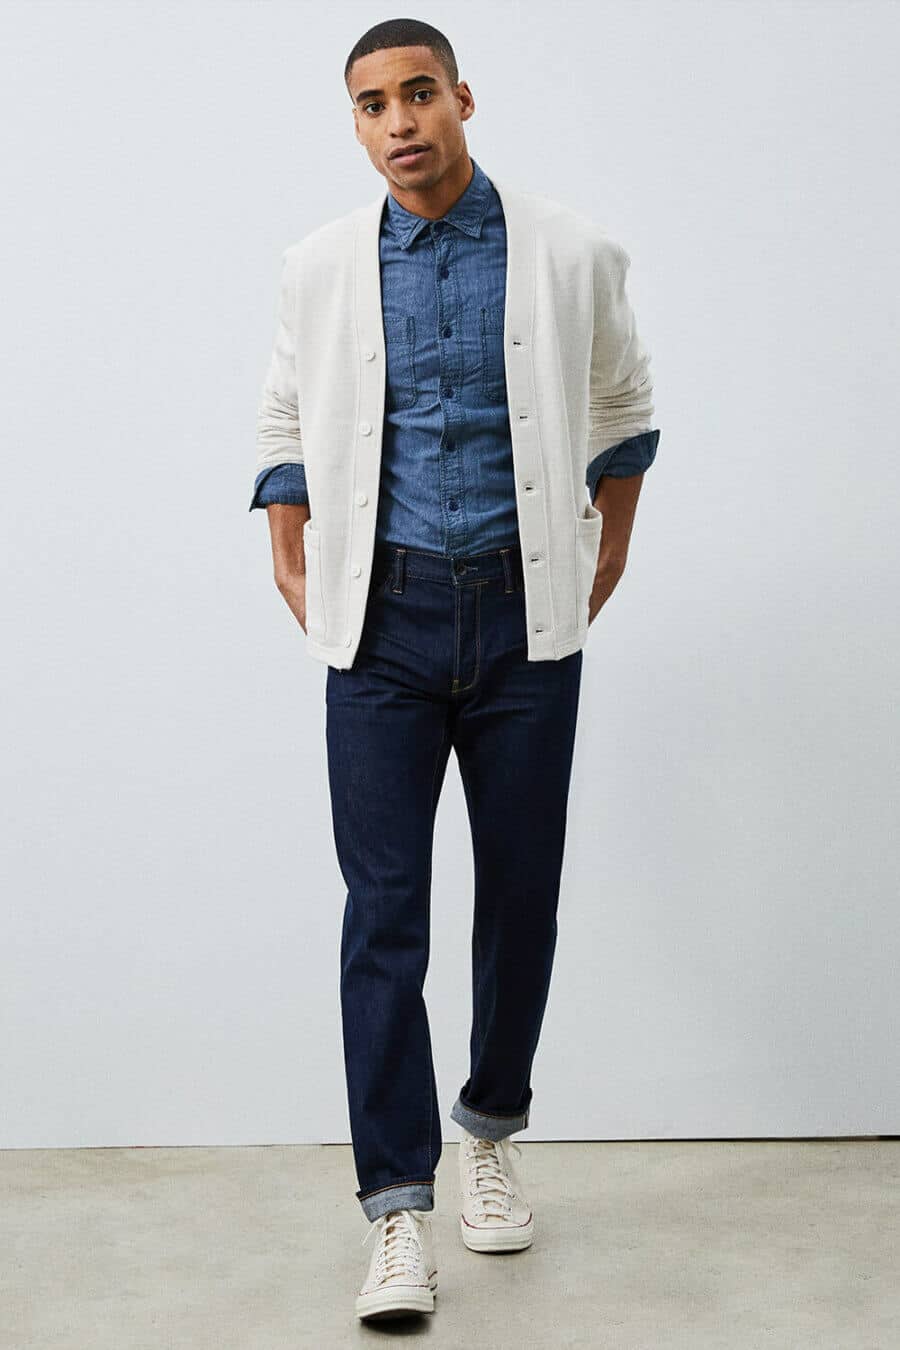 Men's double denim outfit - blue jeans and shirt with white cardigan